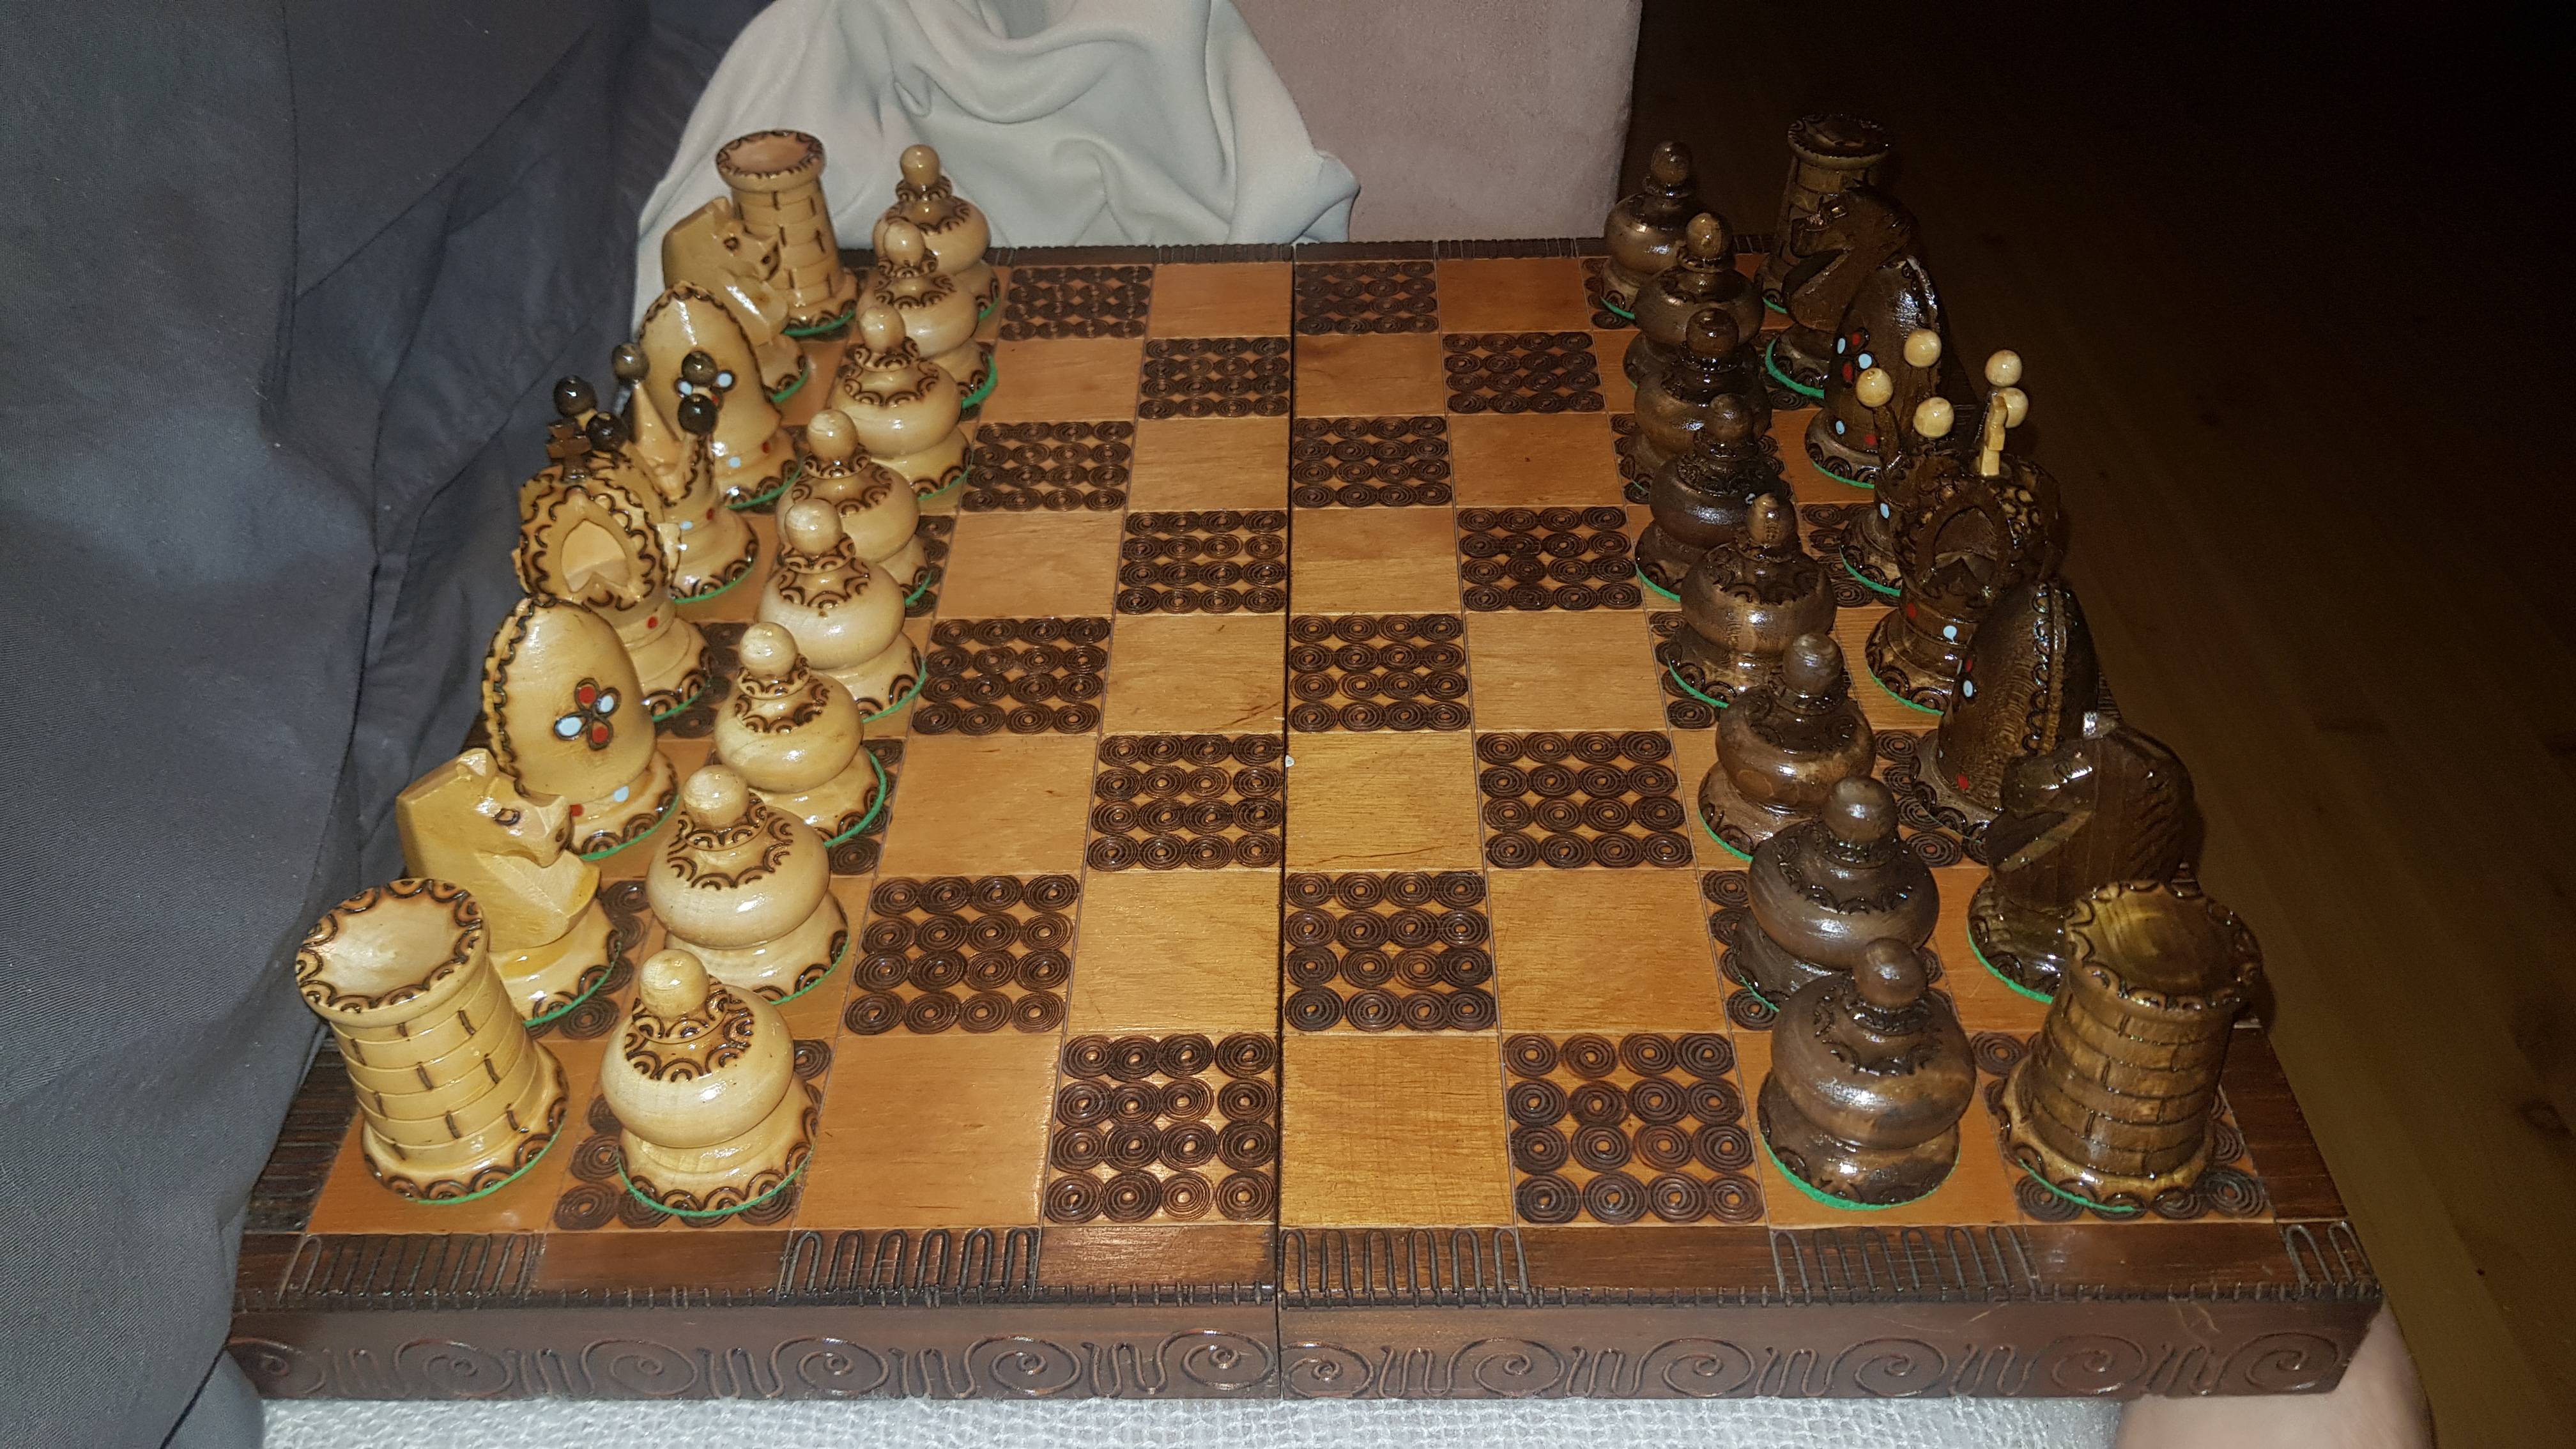 Leads on these Polish or Russian pieces? - Chess Forums 